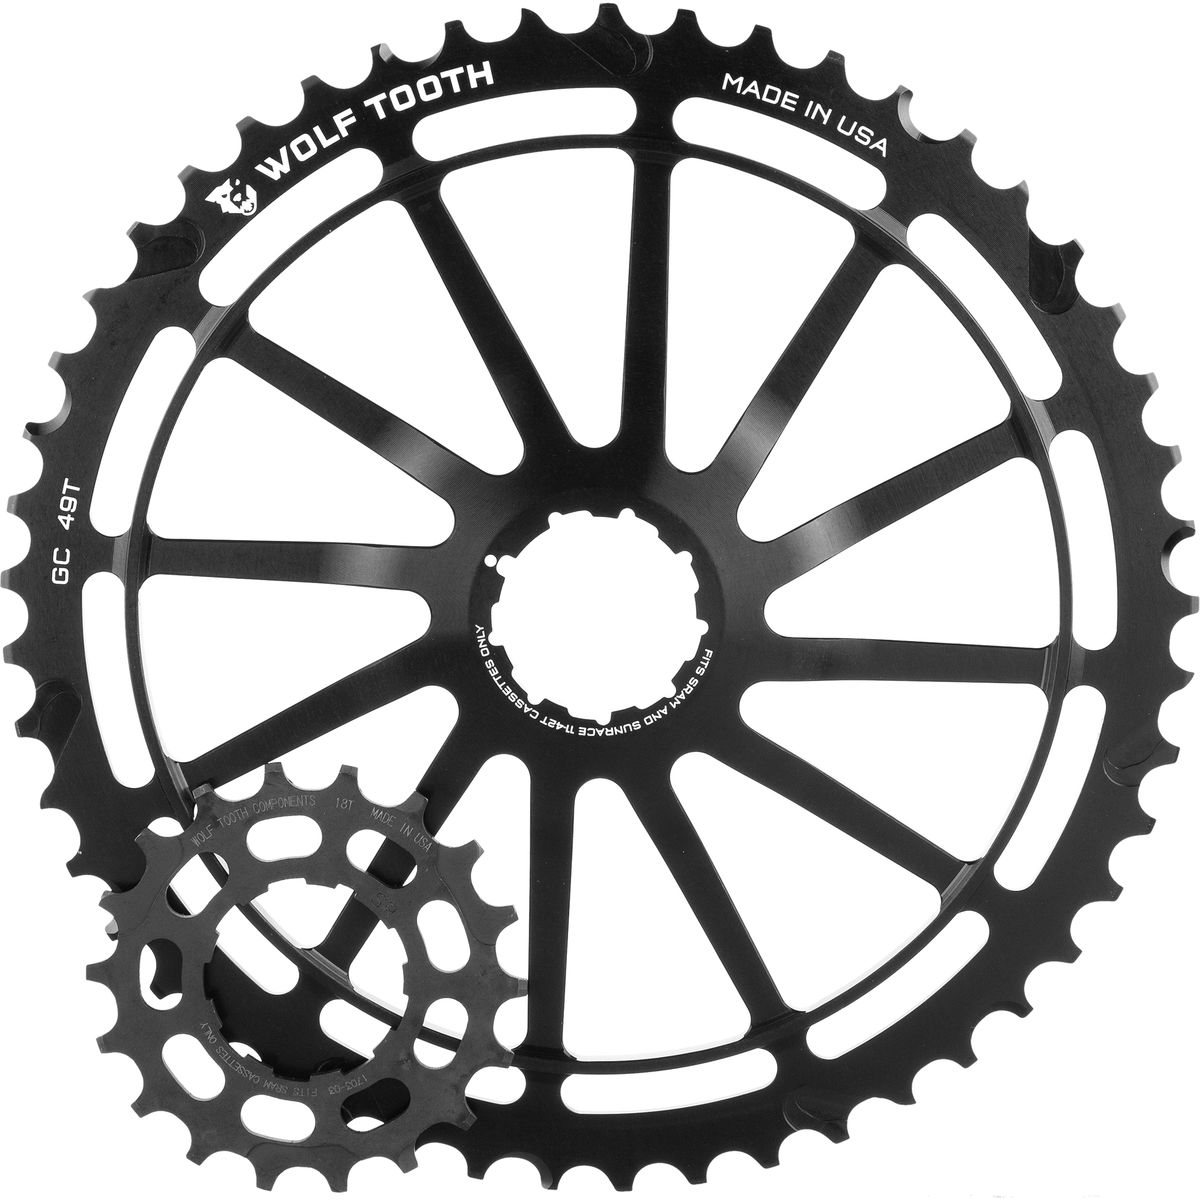 Wolf Tooth Components Giant Cog for SRAM NX